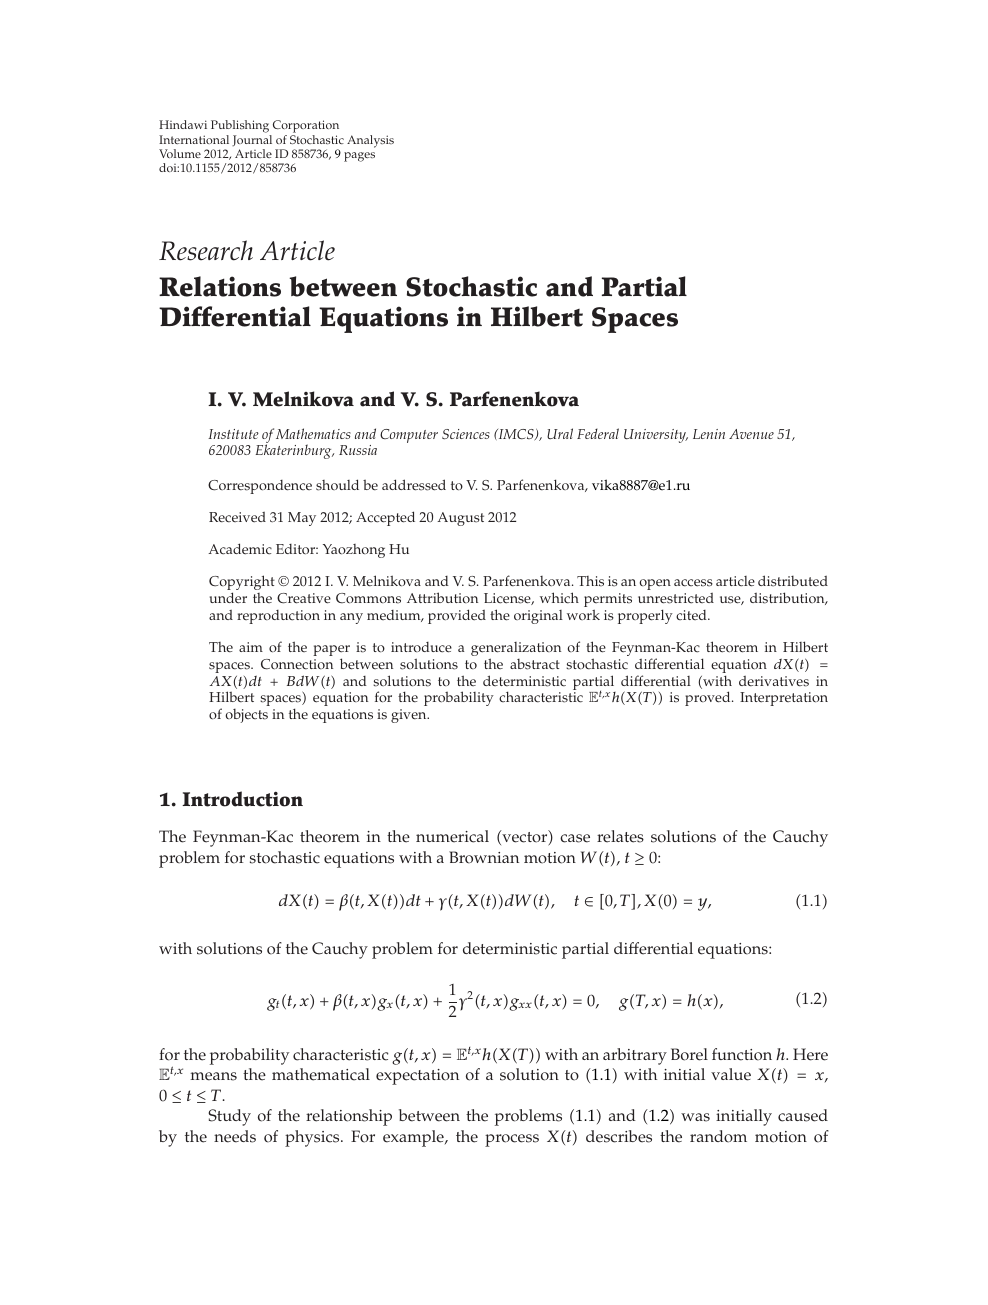 Relations Between Stochastic And Partial Differential Equations In Hilbert Spaces Topic Of Research Paper In Mathematics Download Scholarly Article Pdf And Read For Free On Cyberleninka Open Science Hub